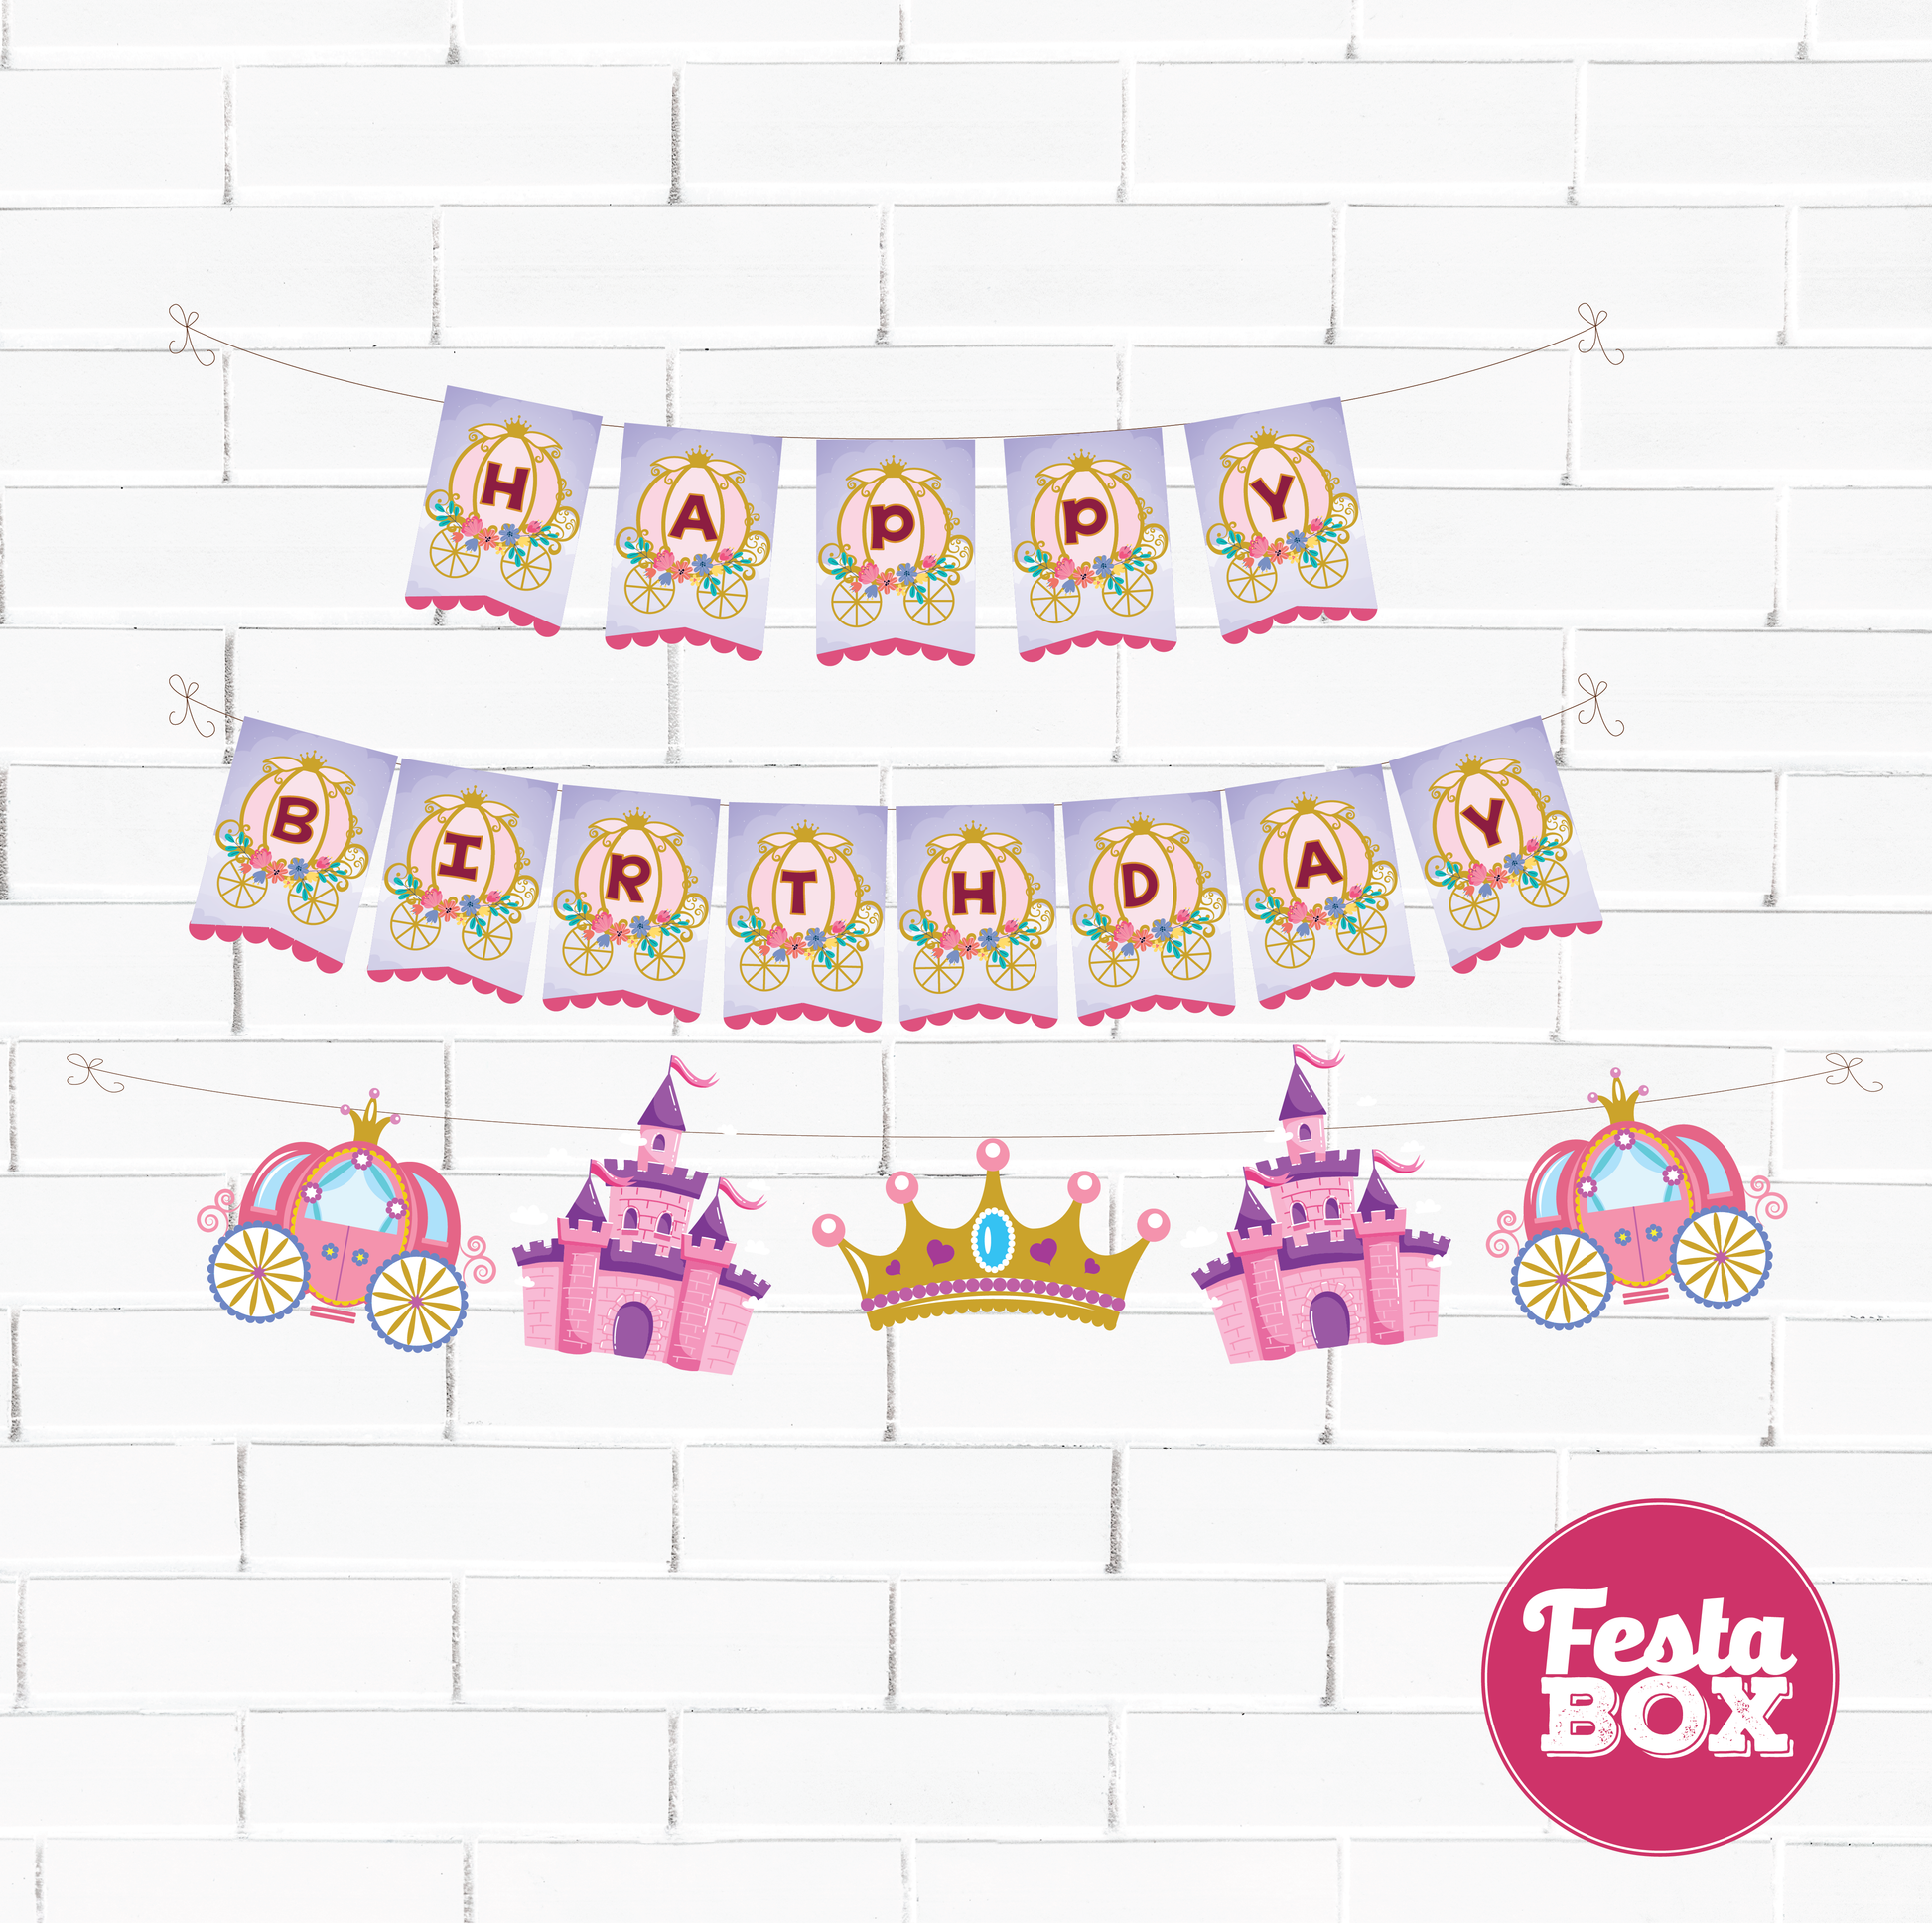 Background Banner for Birthday Party Decoration - Princess Theme - Option 2